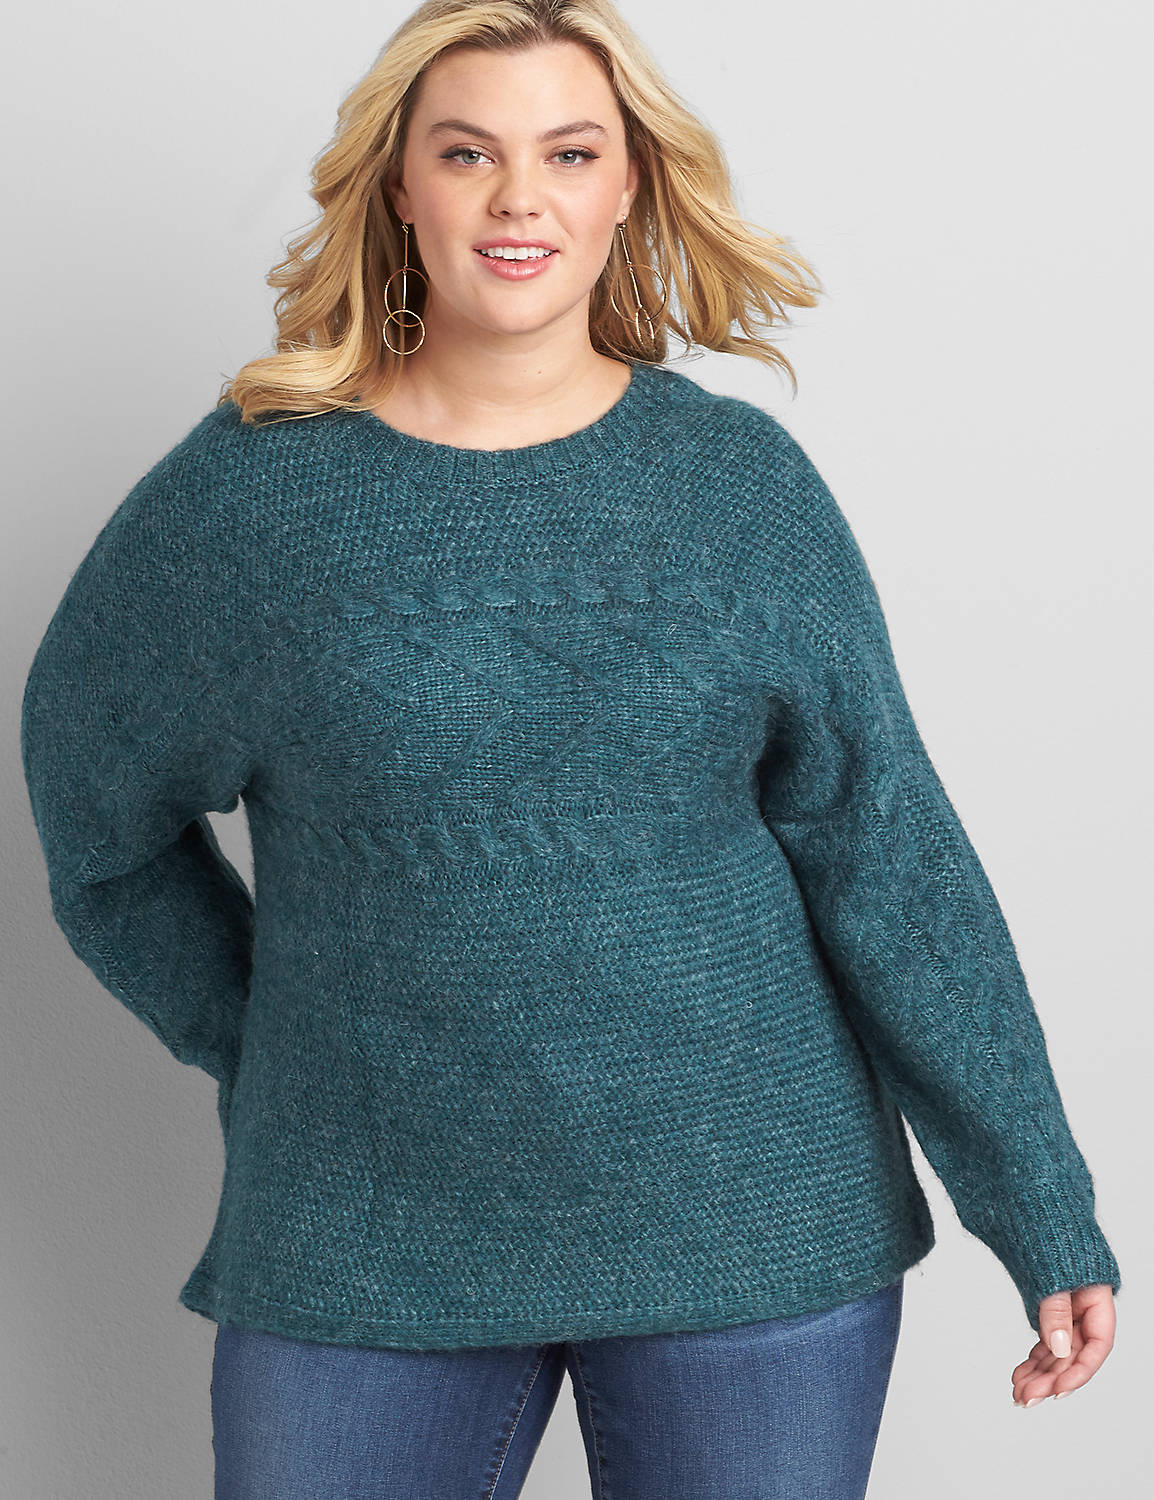 Long Sleeve Crew Neck Pullover with Horizontal Cable 1118269:PANTONE Deep Teal:22/24 Product Image 1